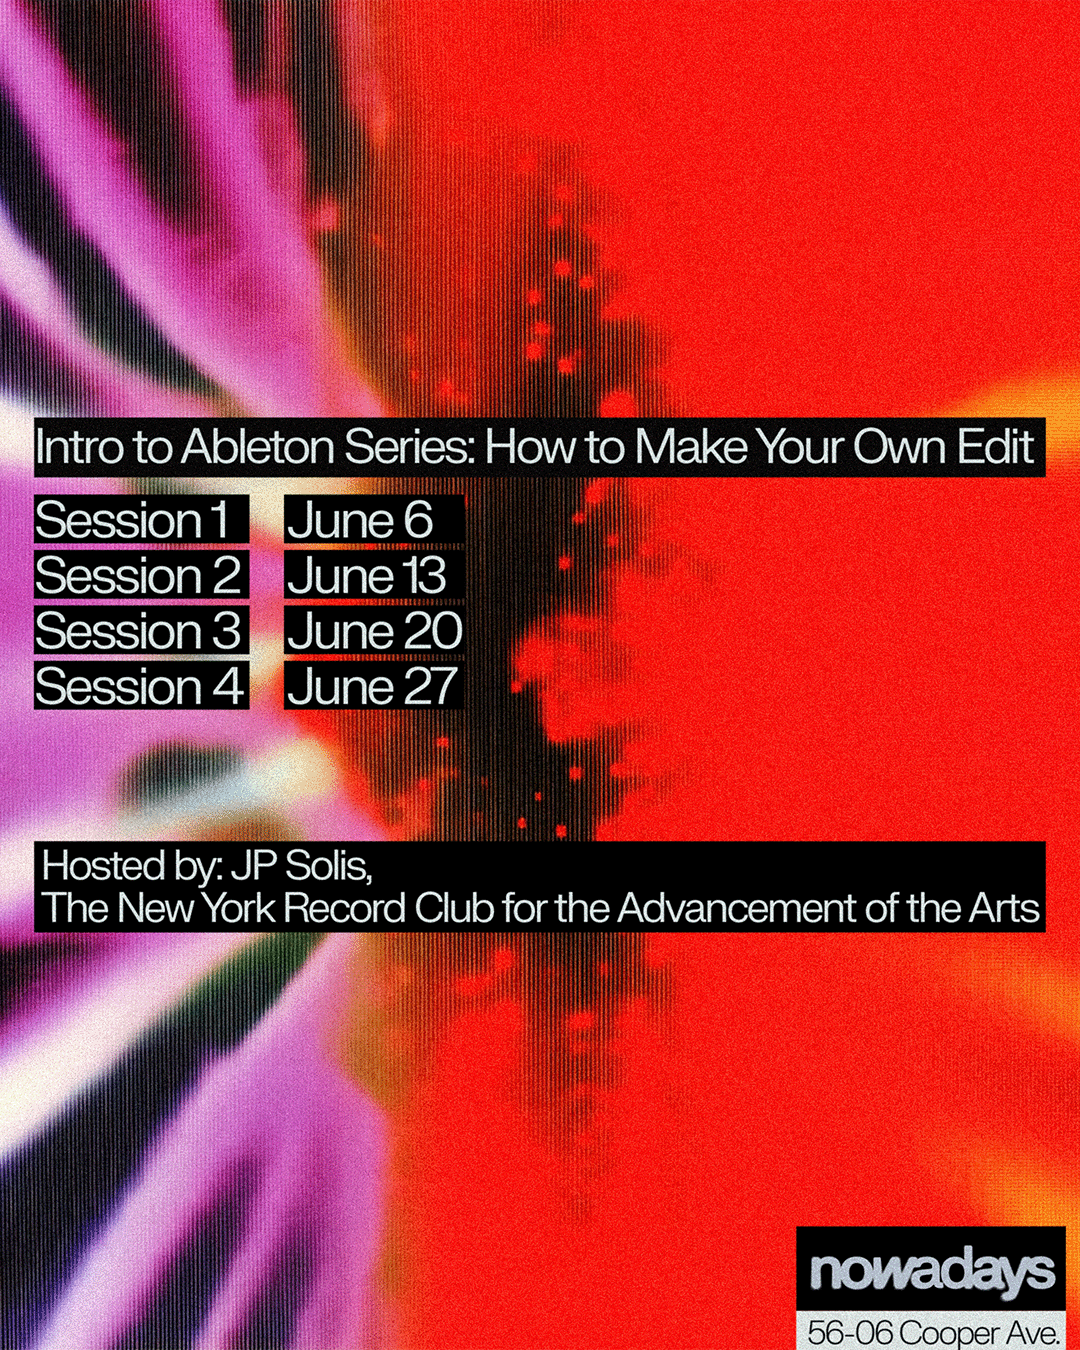 Intro to Ableton Series: How to Make Your Own Edit, Session 3 - フライヤー表